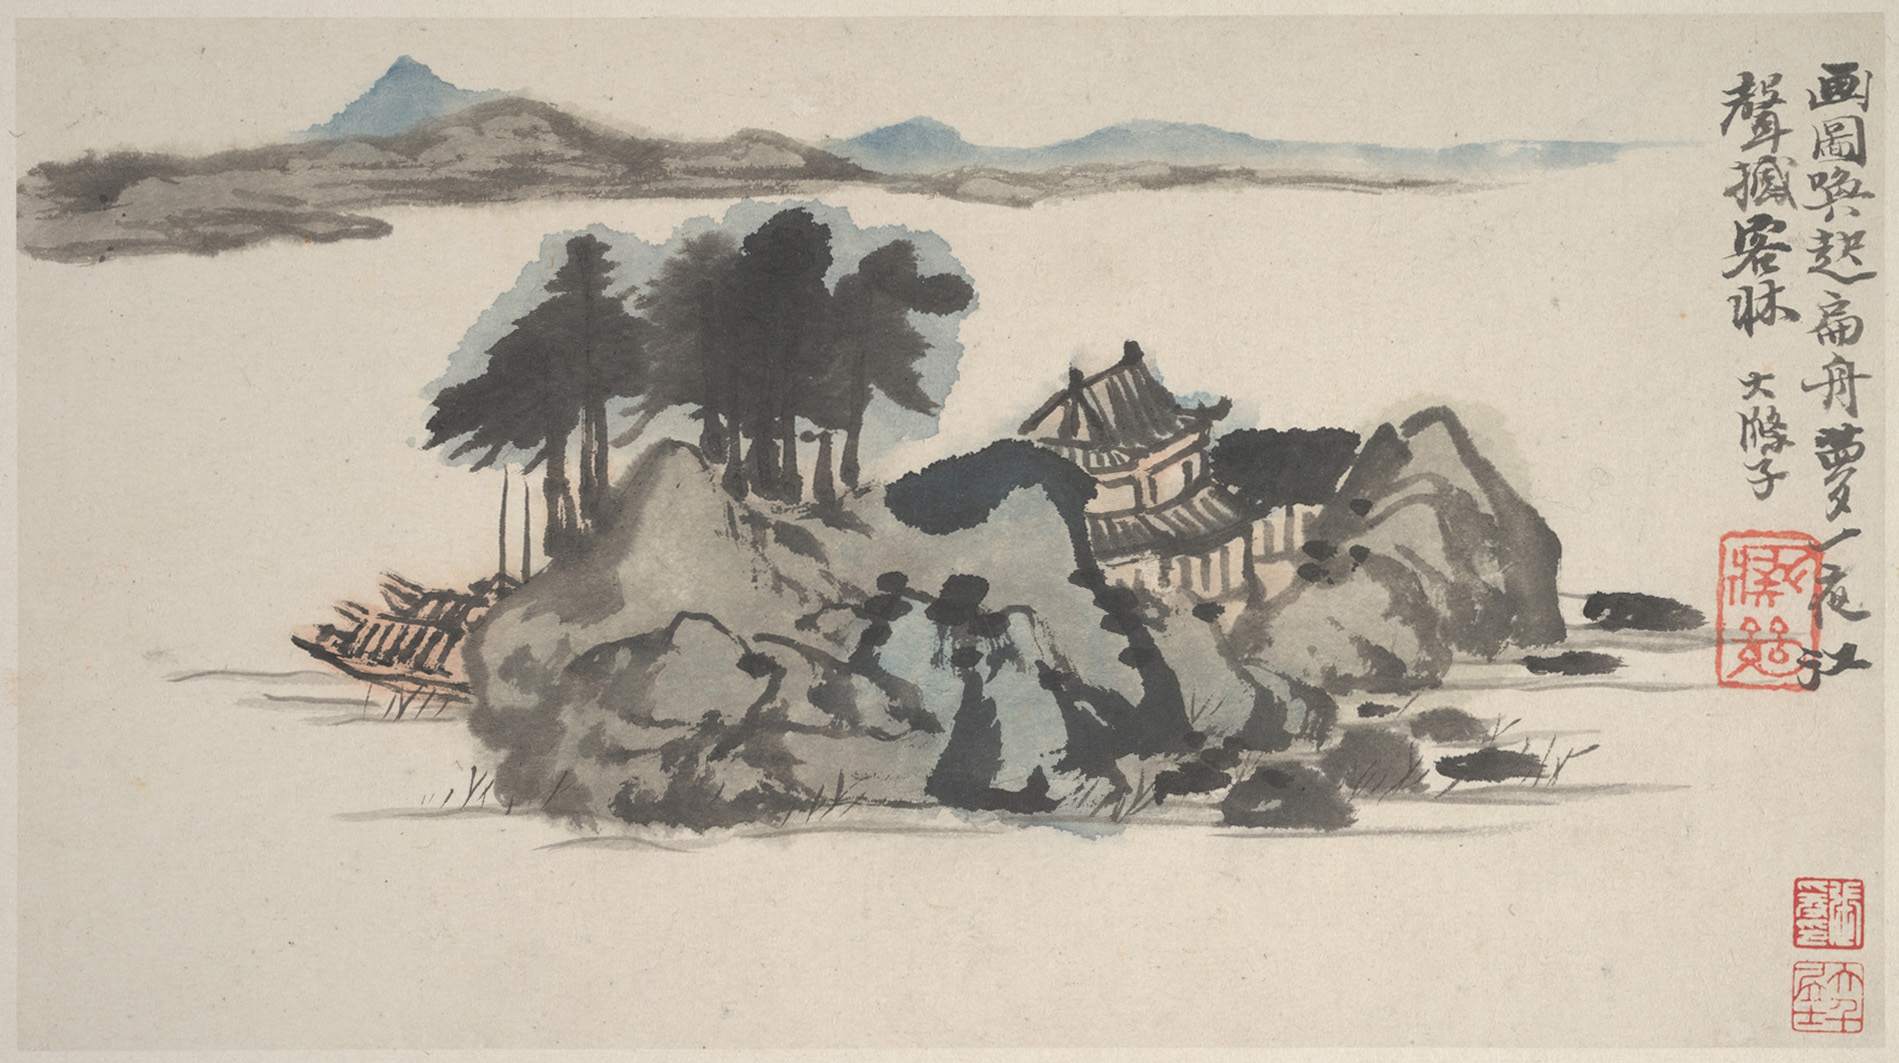 File:清 石濤(朱若極) 四季山水圖 冊-Landscapes of the Four Seasons